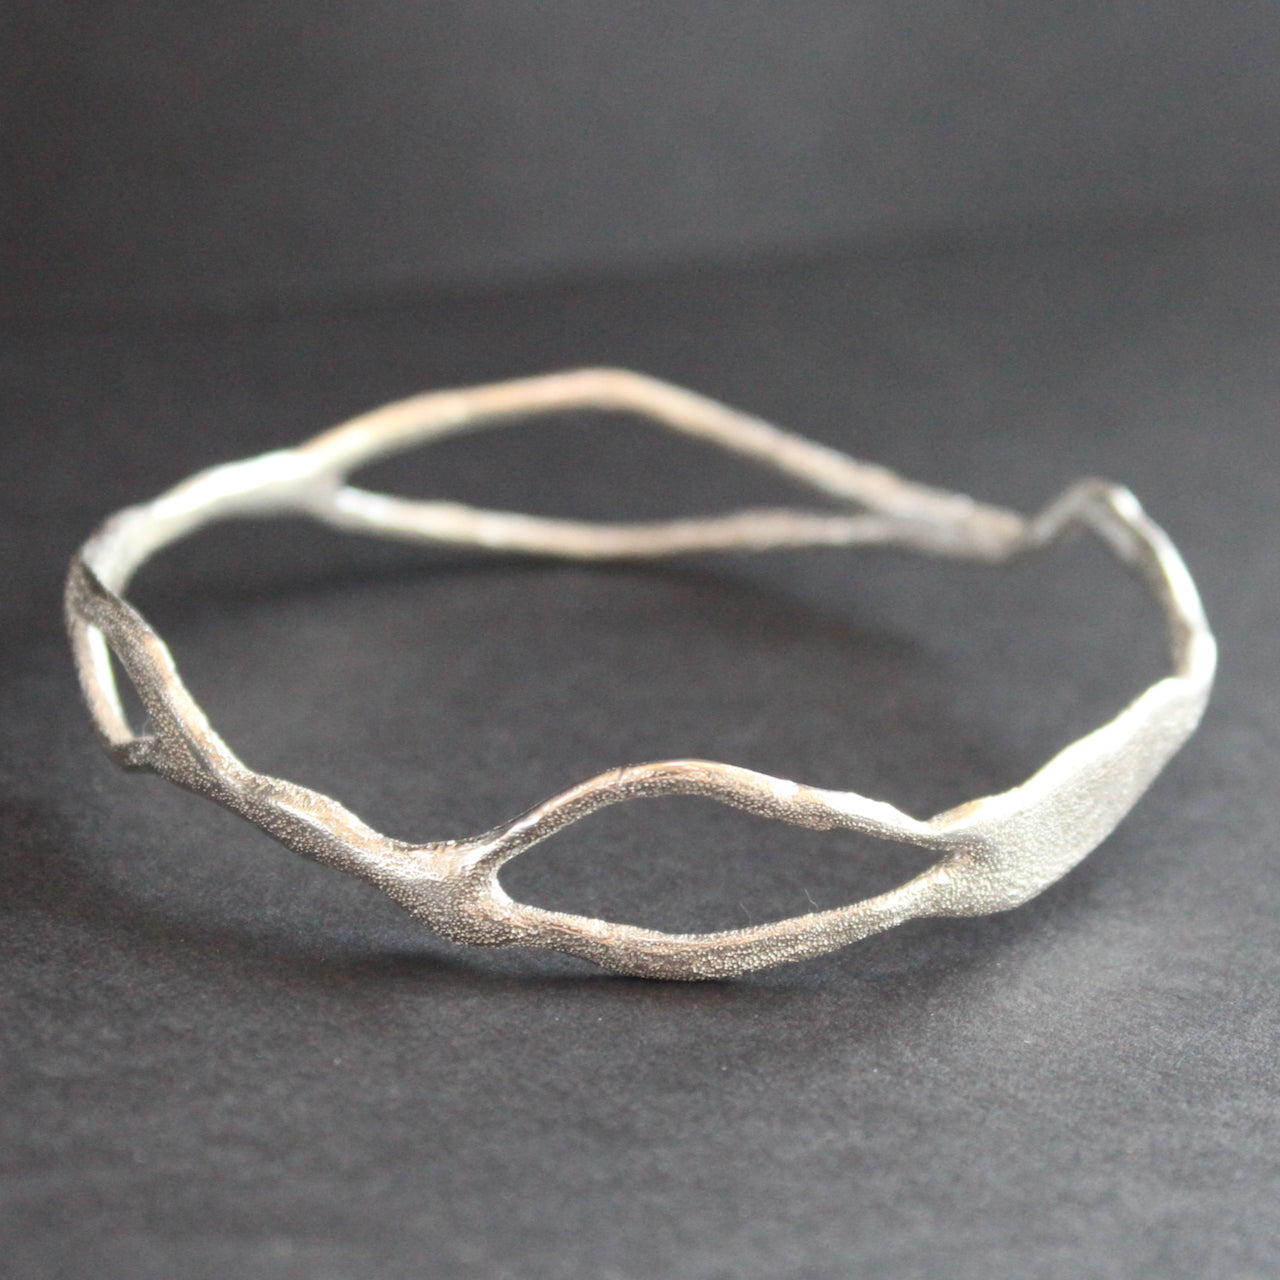 Organically shaped silver bangle by UK artist Claire Stockings Baker.